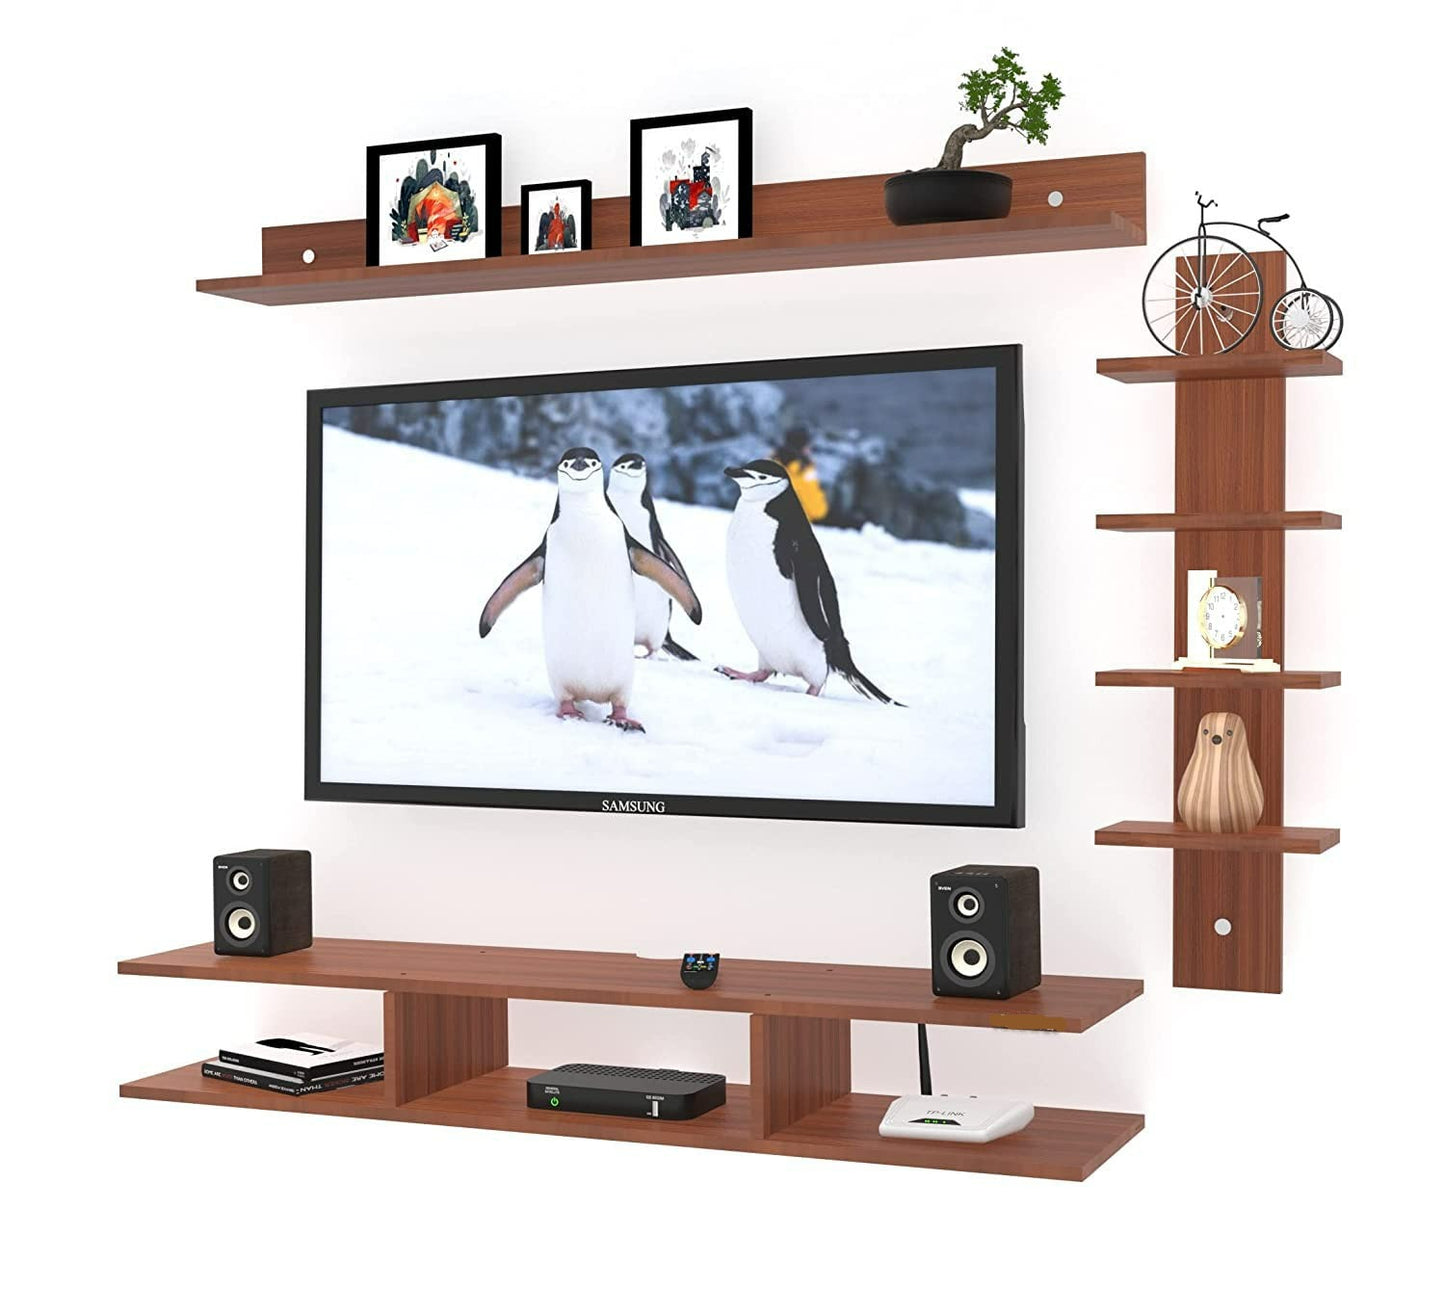 Wall Mount TV Unit: Wall Mount TV Unit With Set Top Box Stand(Walnut)